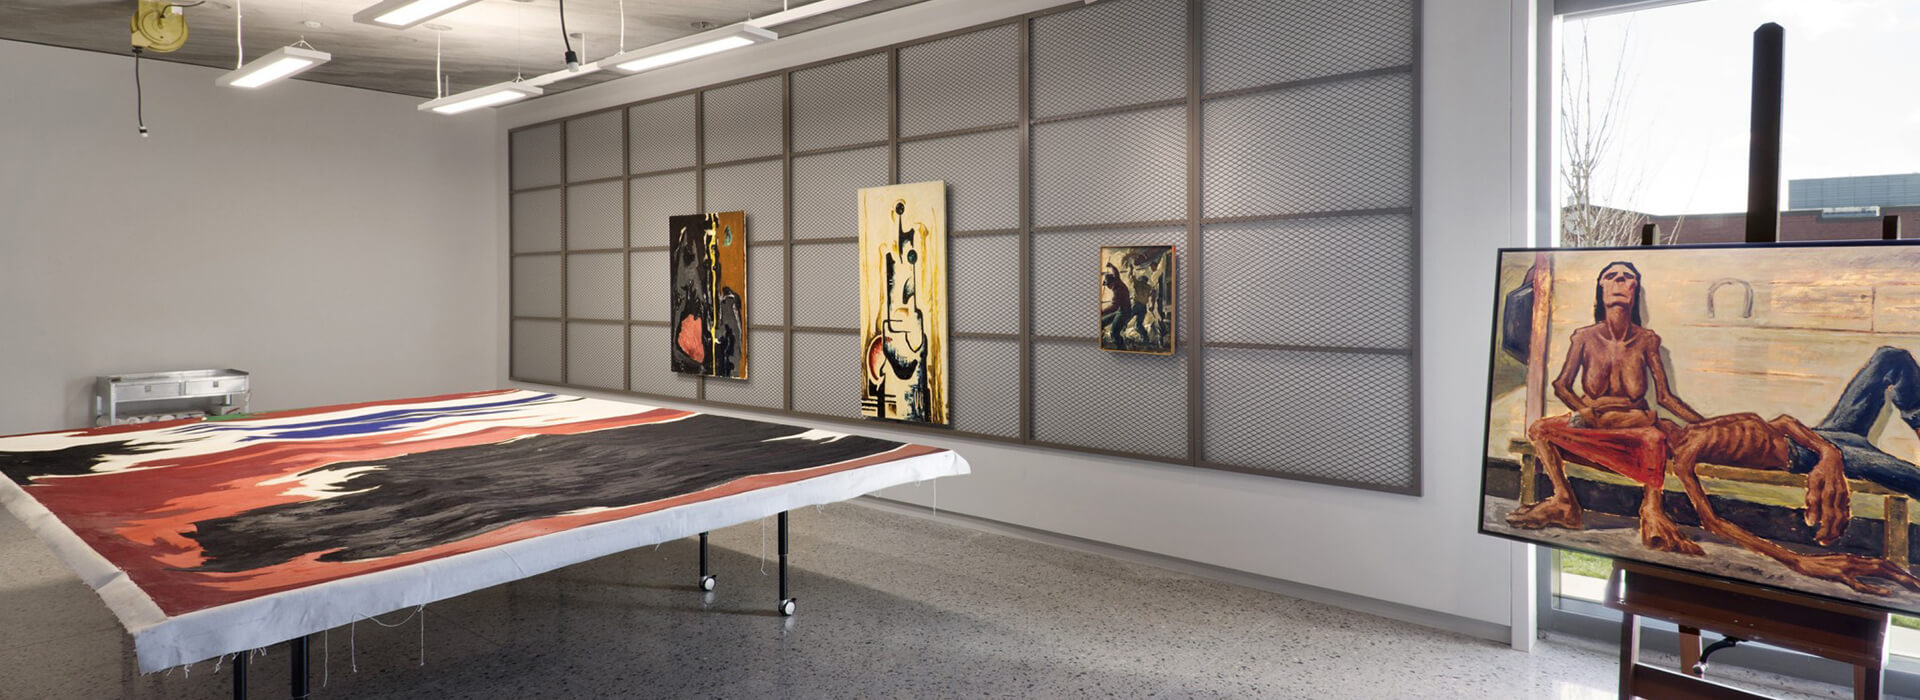 Art conservation studio at the Clyfford Still Museum with paintings on tables and the wall